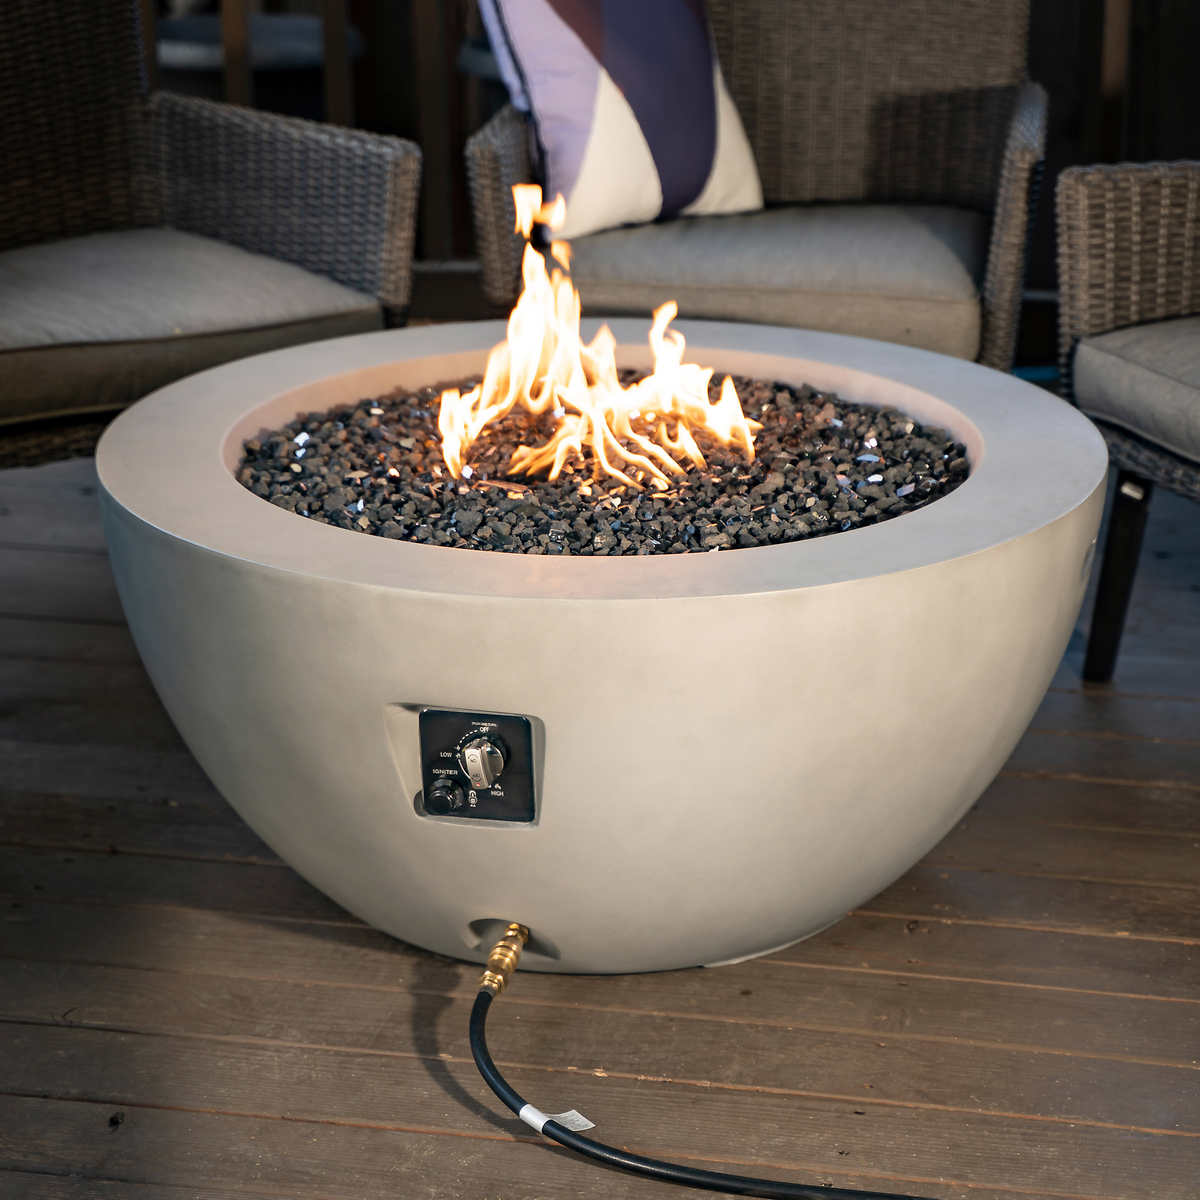 Faux Concrete Gas Fire Pit Costco, Outdoor Fire Pit Electronic Ignition